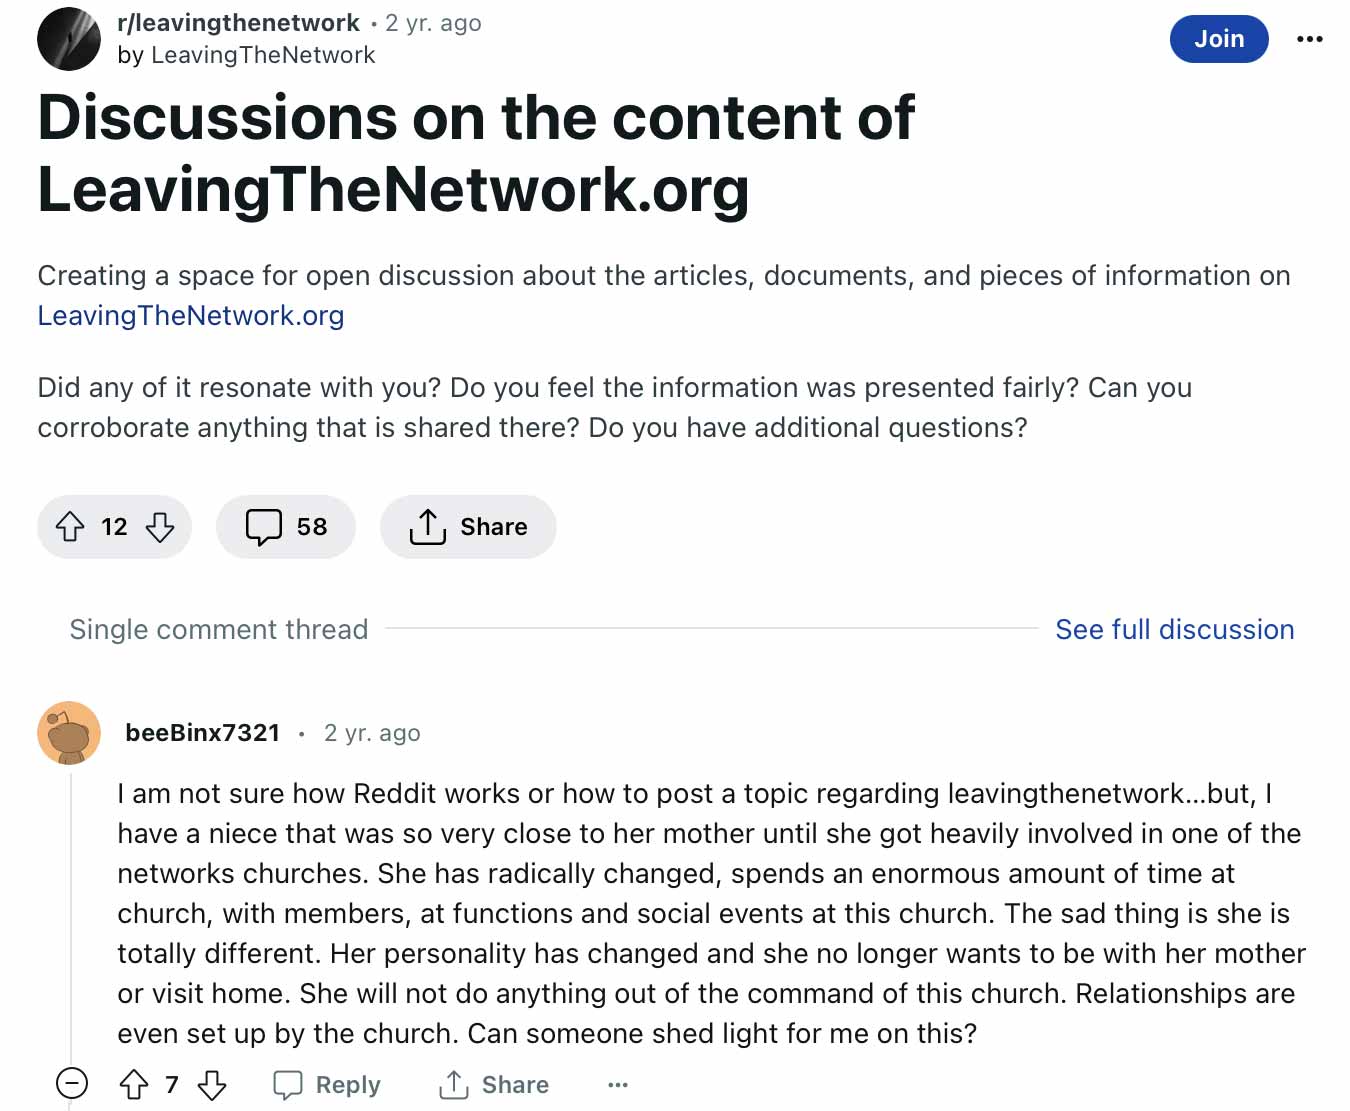 I am not sure how Reddit works or how to post a topic regarding leavingthenetwork...but, I have a niece that was so very close to her mother until she got heavily involved in one of the networks churches. She has radically changed, spends an enormous amount of time at church, with members, at functions and social events at this church. The sad thing is she is totally different. Her personality has changed and she no longer wants to be with her mother or visit home. She will not do anything out of the command of this church. Relationships are even set up by the church. Can someone shed light for me on this?"